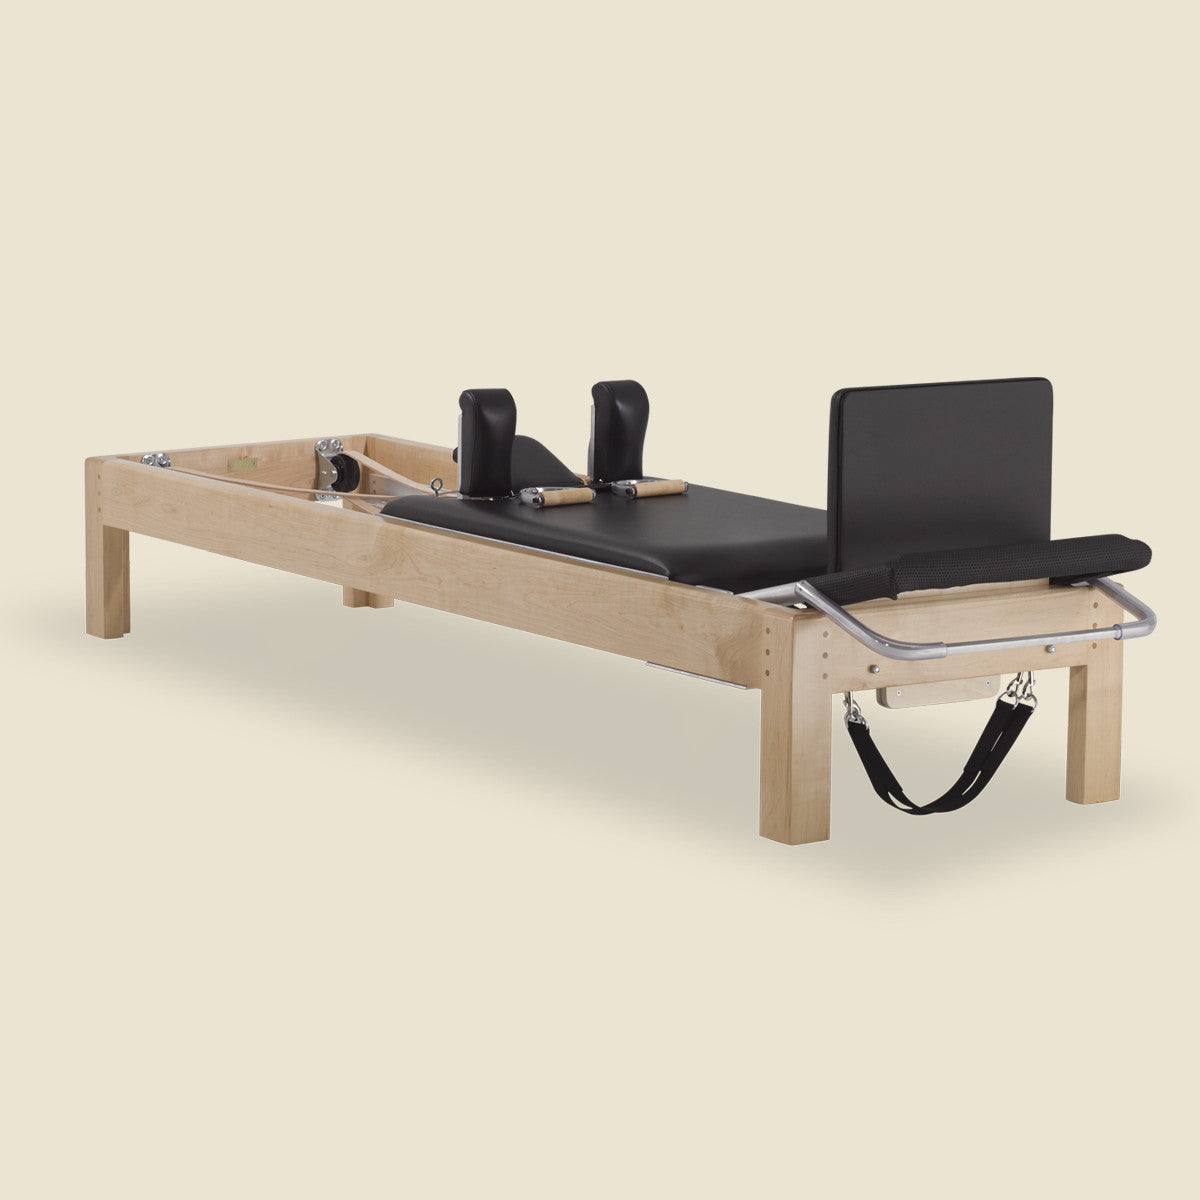 REFORING Pilates Reformer Machine for Home,Quality Pilates Reformers  Equipment with Adjustable Resistance System,PU Leather,Durable Piano Wire  Springs and Silent Padded Carriage (F1 Maple Series), Reformers -   Canada